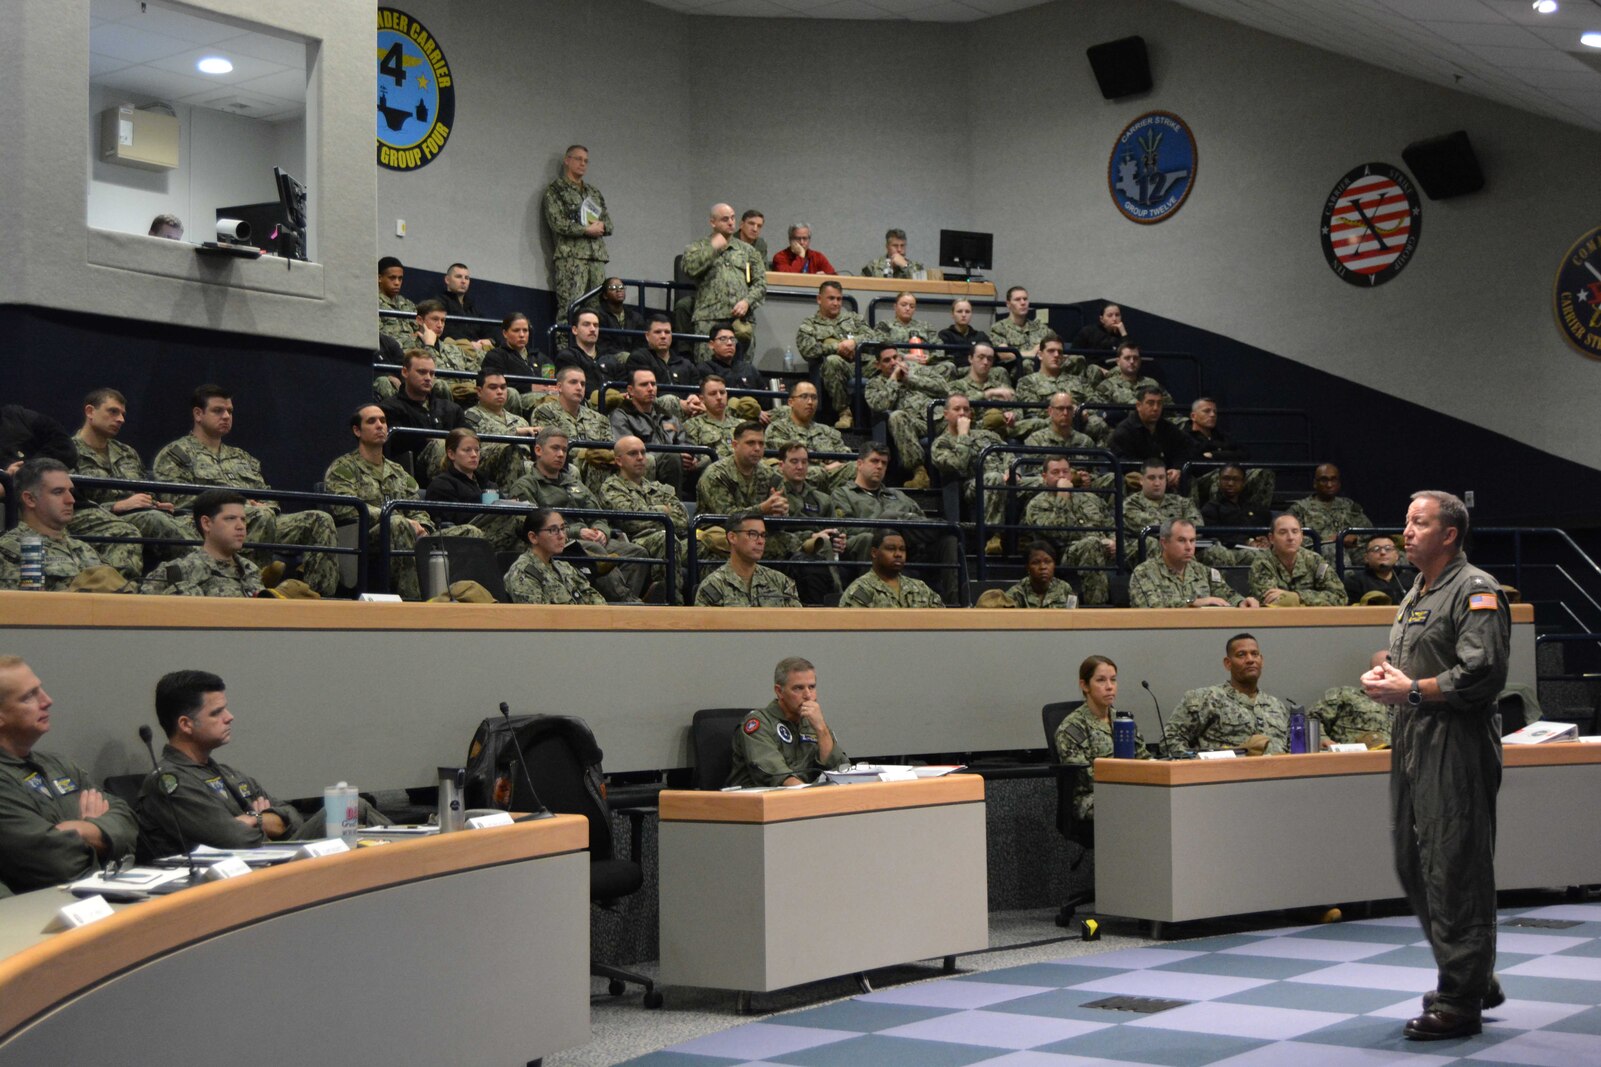 Rear Adm. Jeffrey “Caesar” Czerewko, commander, Carrier Strike Group (CSG) 4, provides welcoming remarks at a warfare commanders conference for CSG 2 leadership hosted by Tactical Training Group Atlantic.